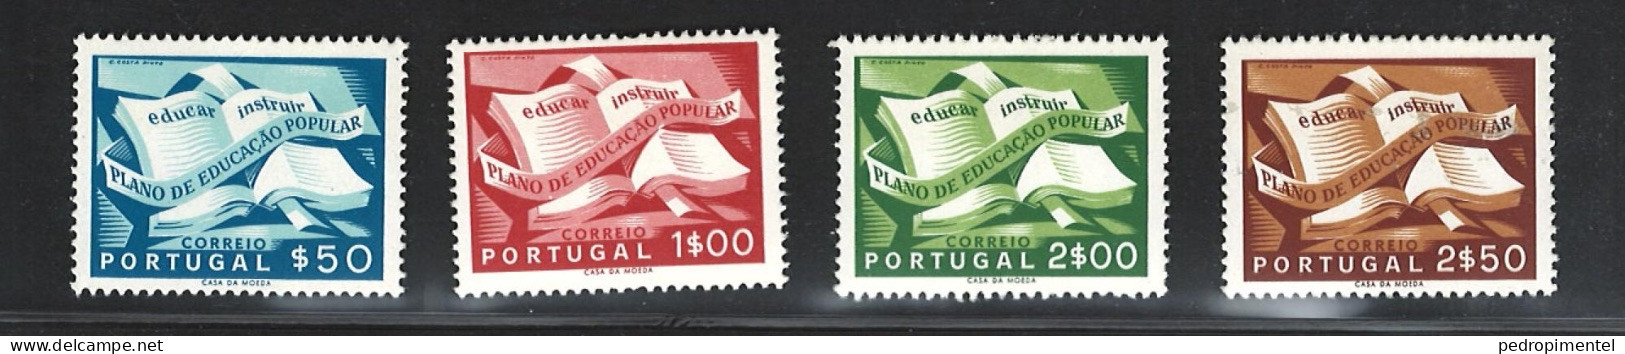 Portugal Stamps 1954 "Popular Education Plan" Condition MNH #796-799 - Ungebraucht